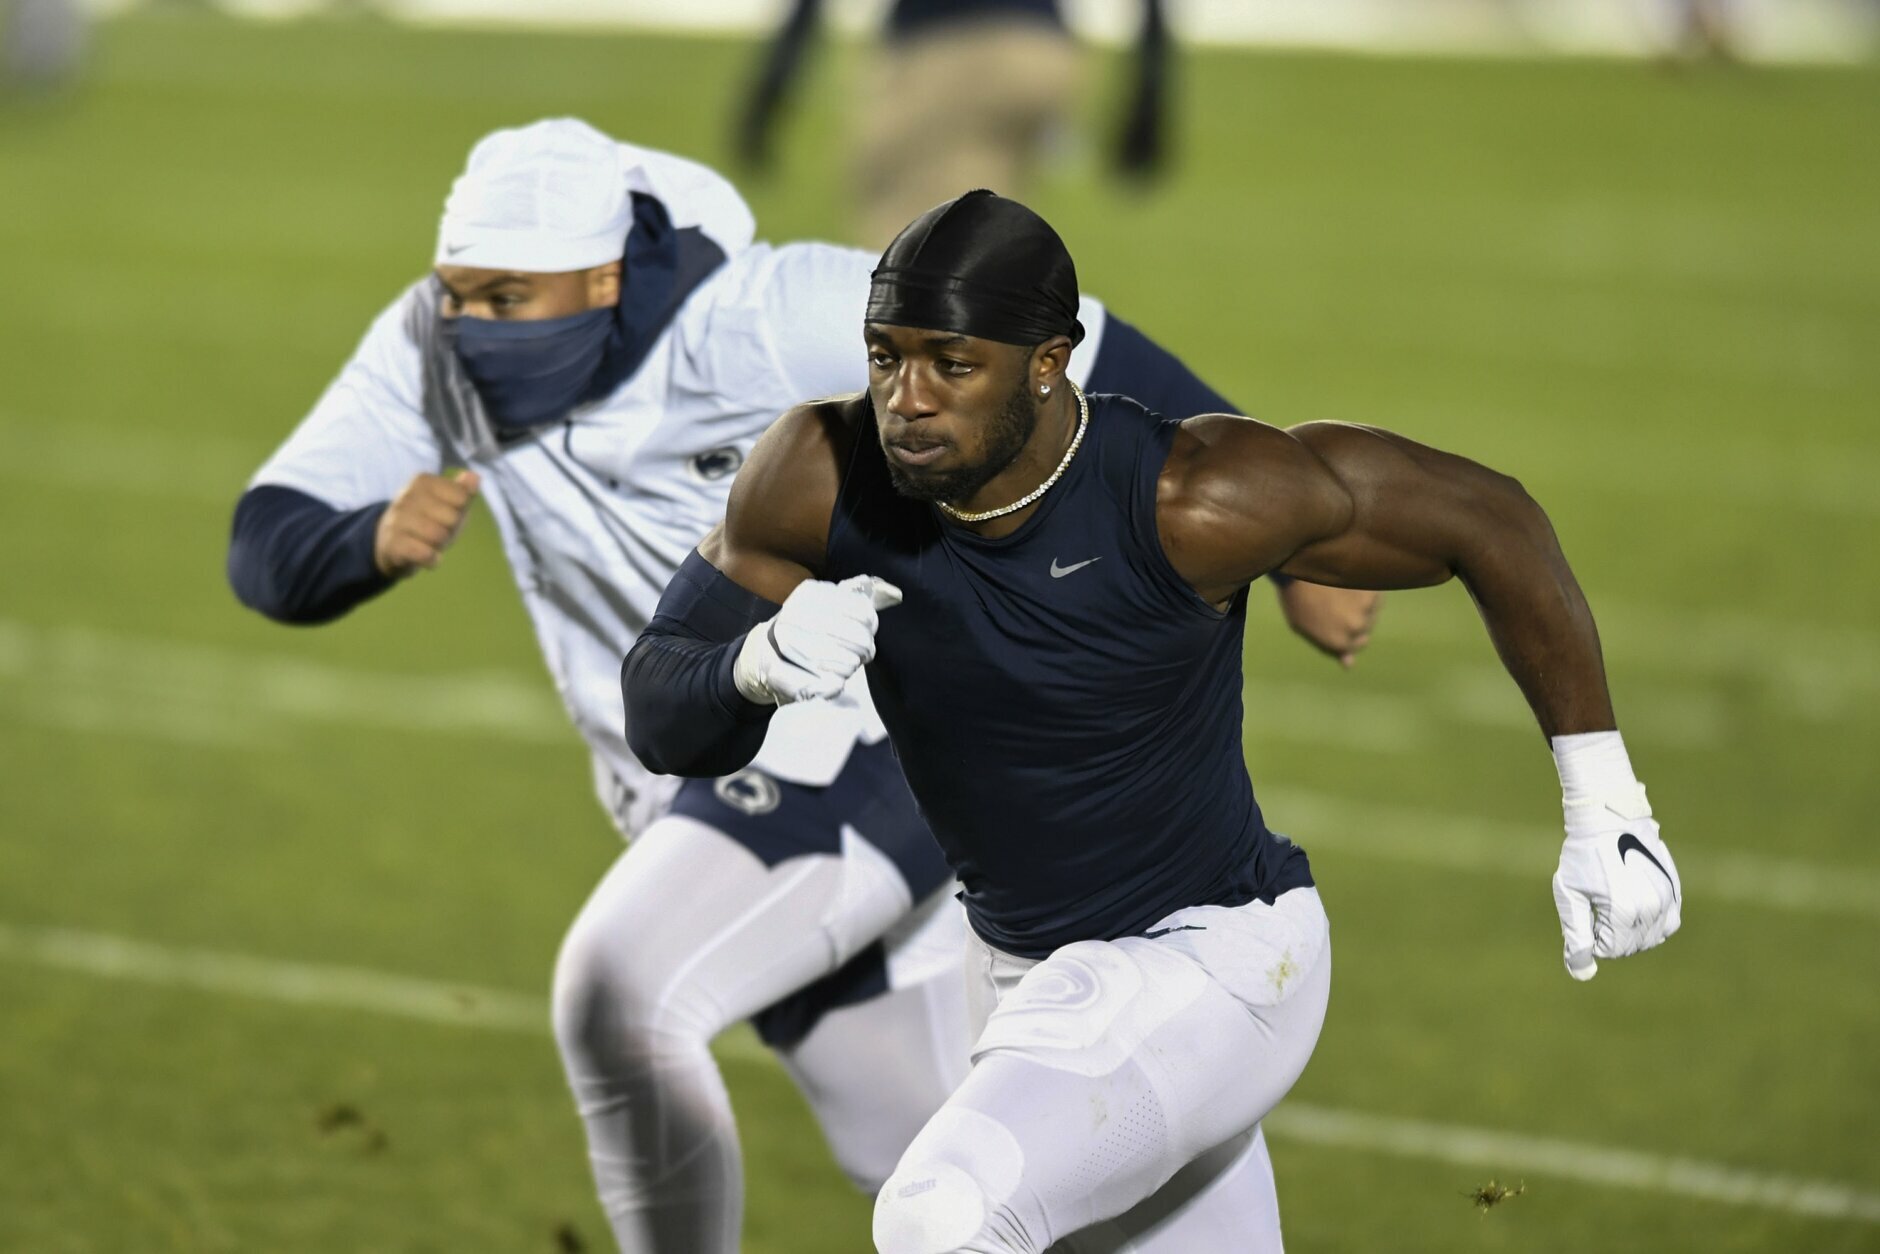 FILE - Penn State defensive end Jayson Oweh warms up before an NCAA college football game against Ohio State in State College, Pa., in this Saturday, Oct. 31, 2020, file photo. Oweh is a possible first round pick in the NFL Draft, April 29-May 1, 2021, in Cleveland. (AP Photo/Barry Reeger, File)